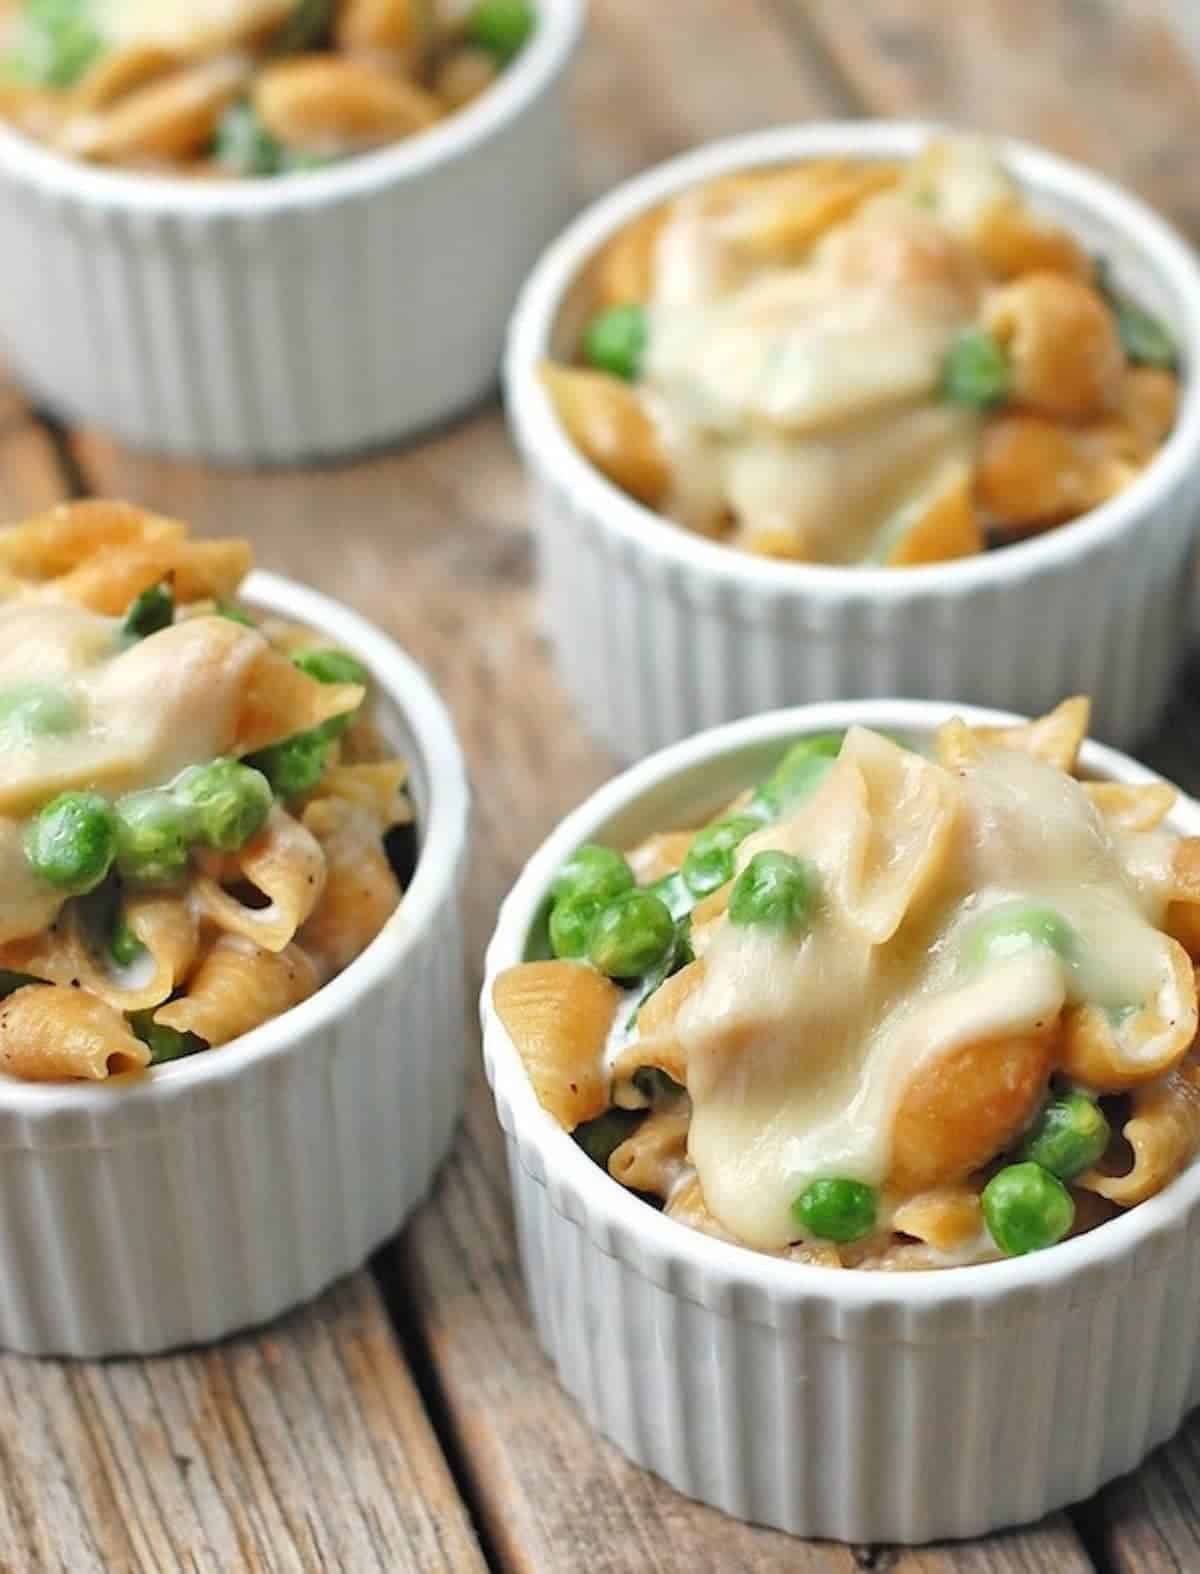 Pasta baked in ramekins and topped with cheese.